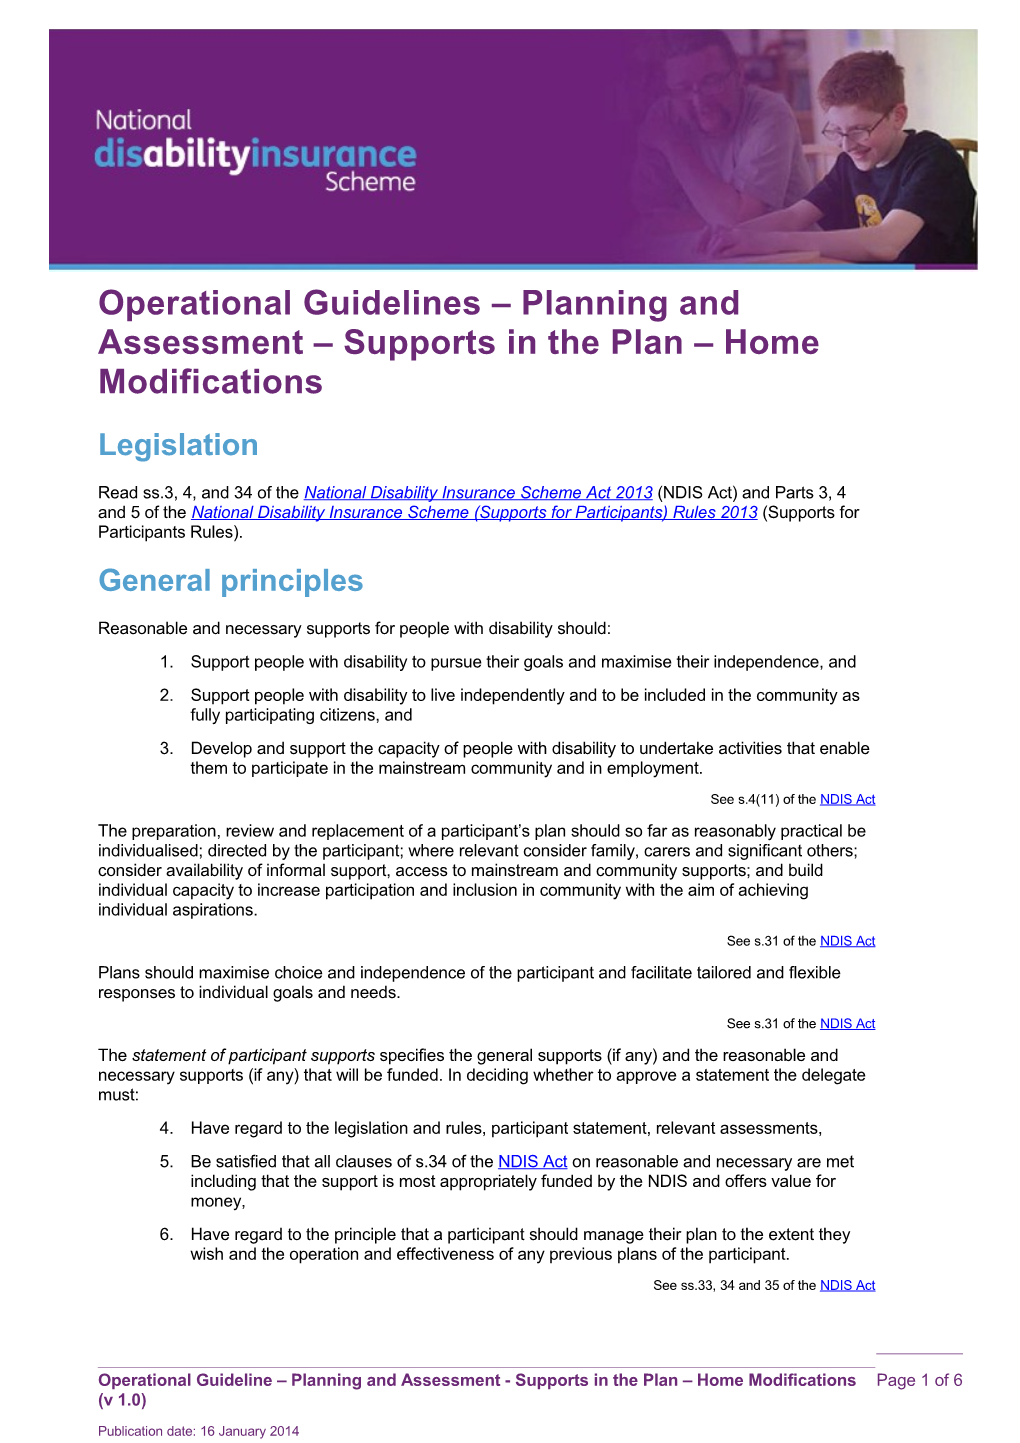 Operational Guidelines Planning and Assessment Supports in the Plan Home Modifications